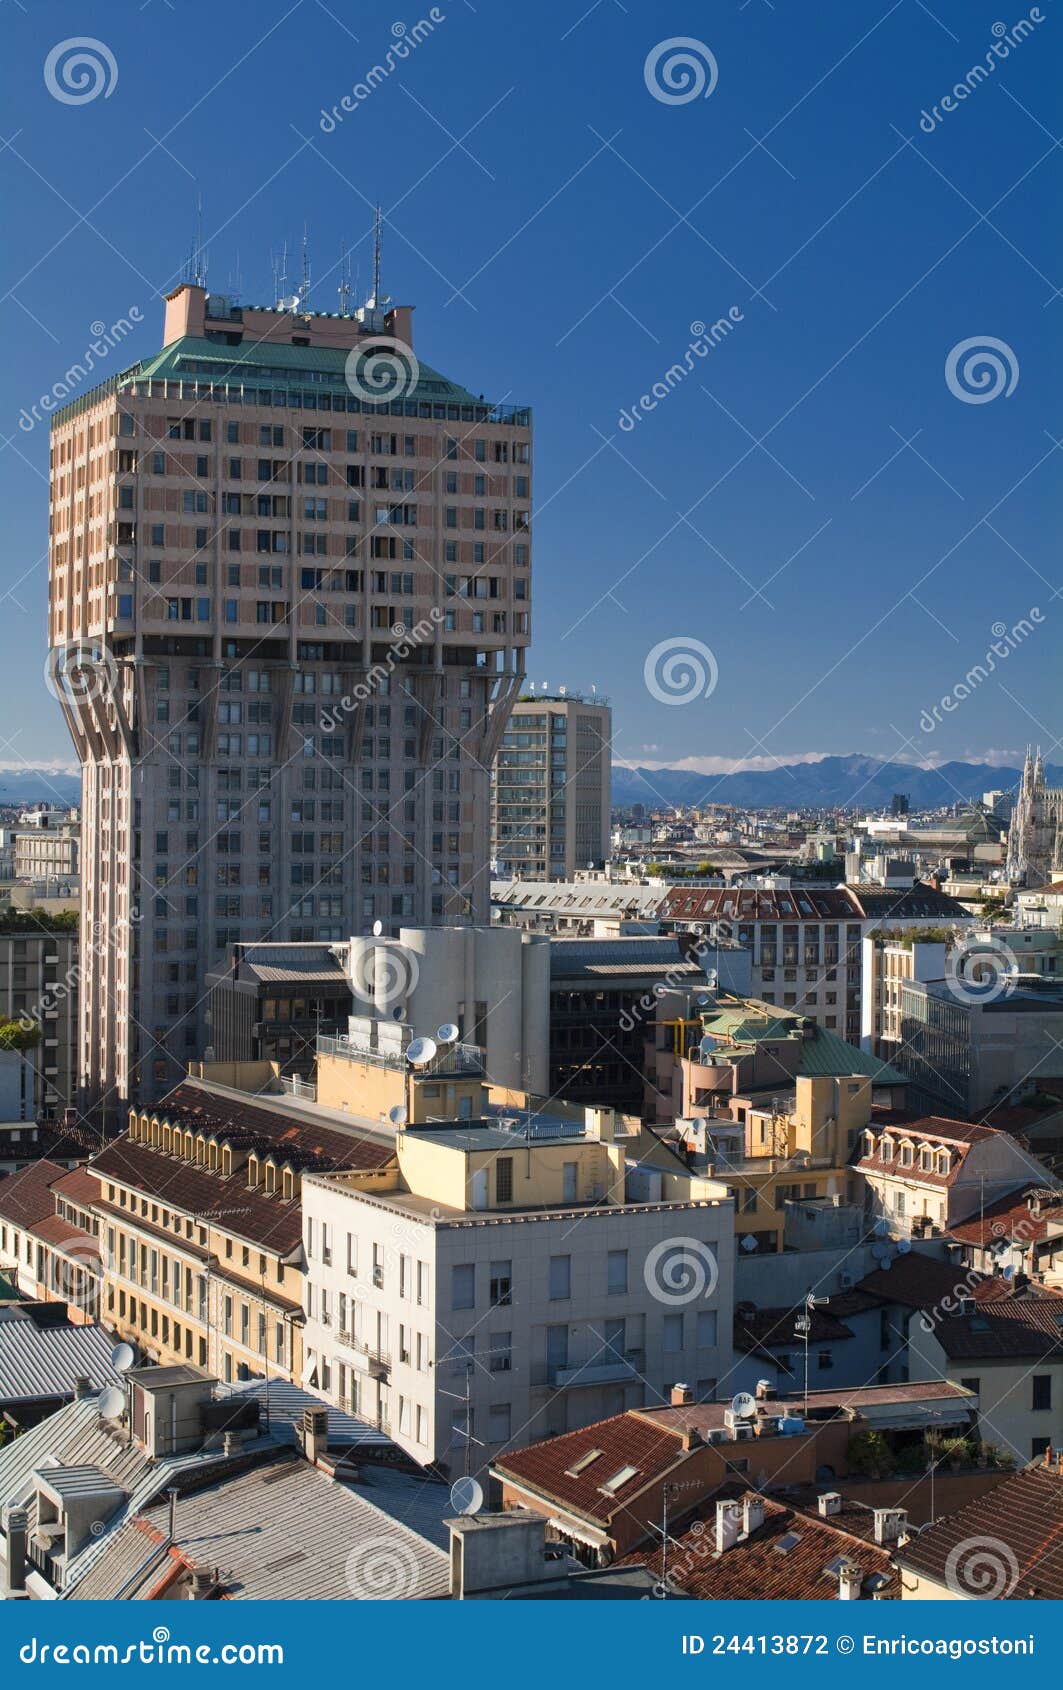 velasca tower in milan with skyline